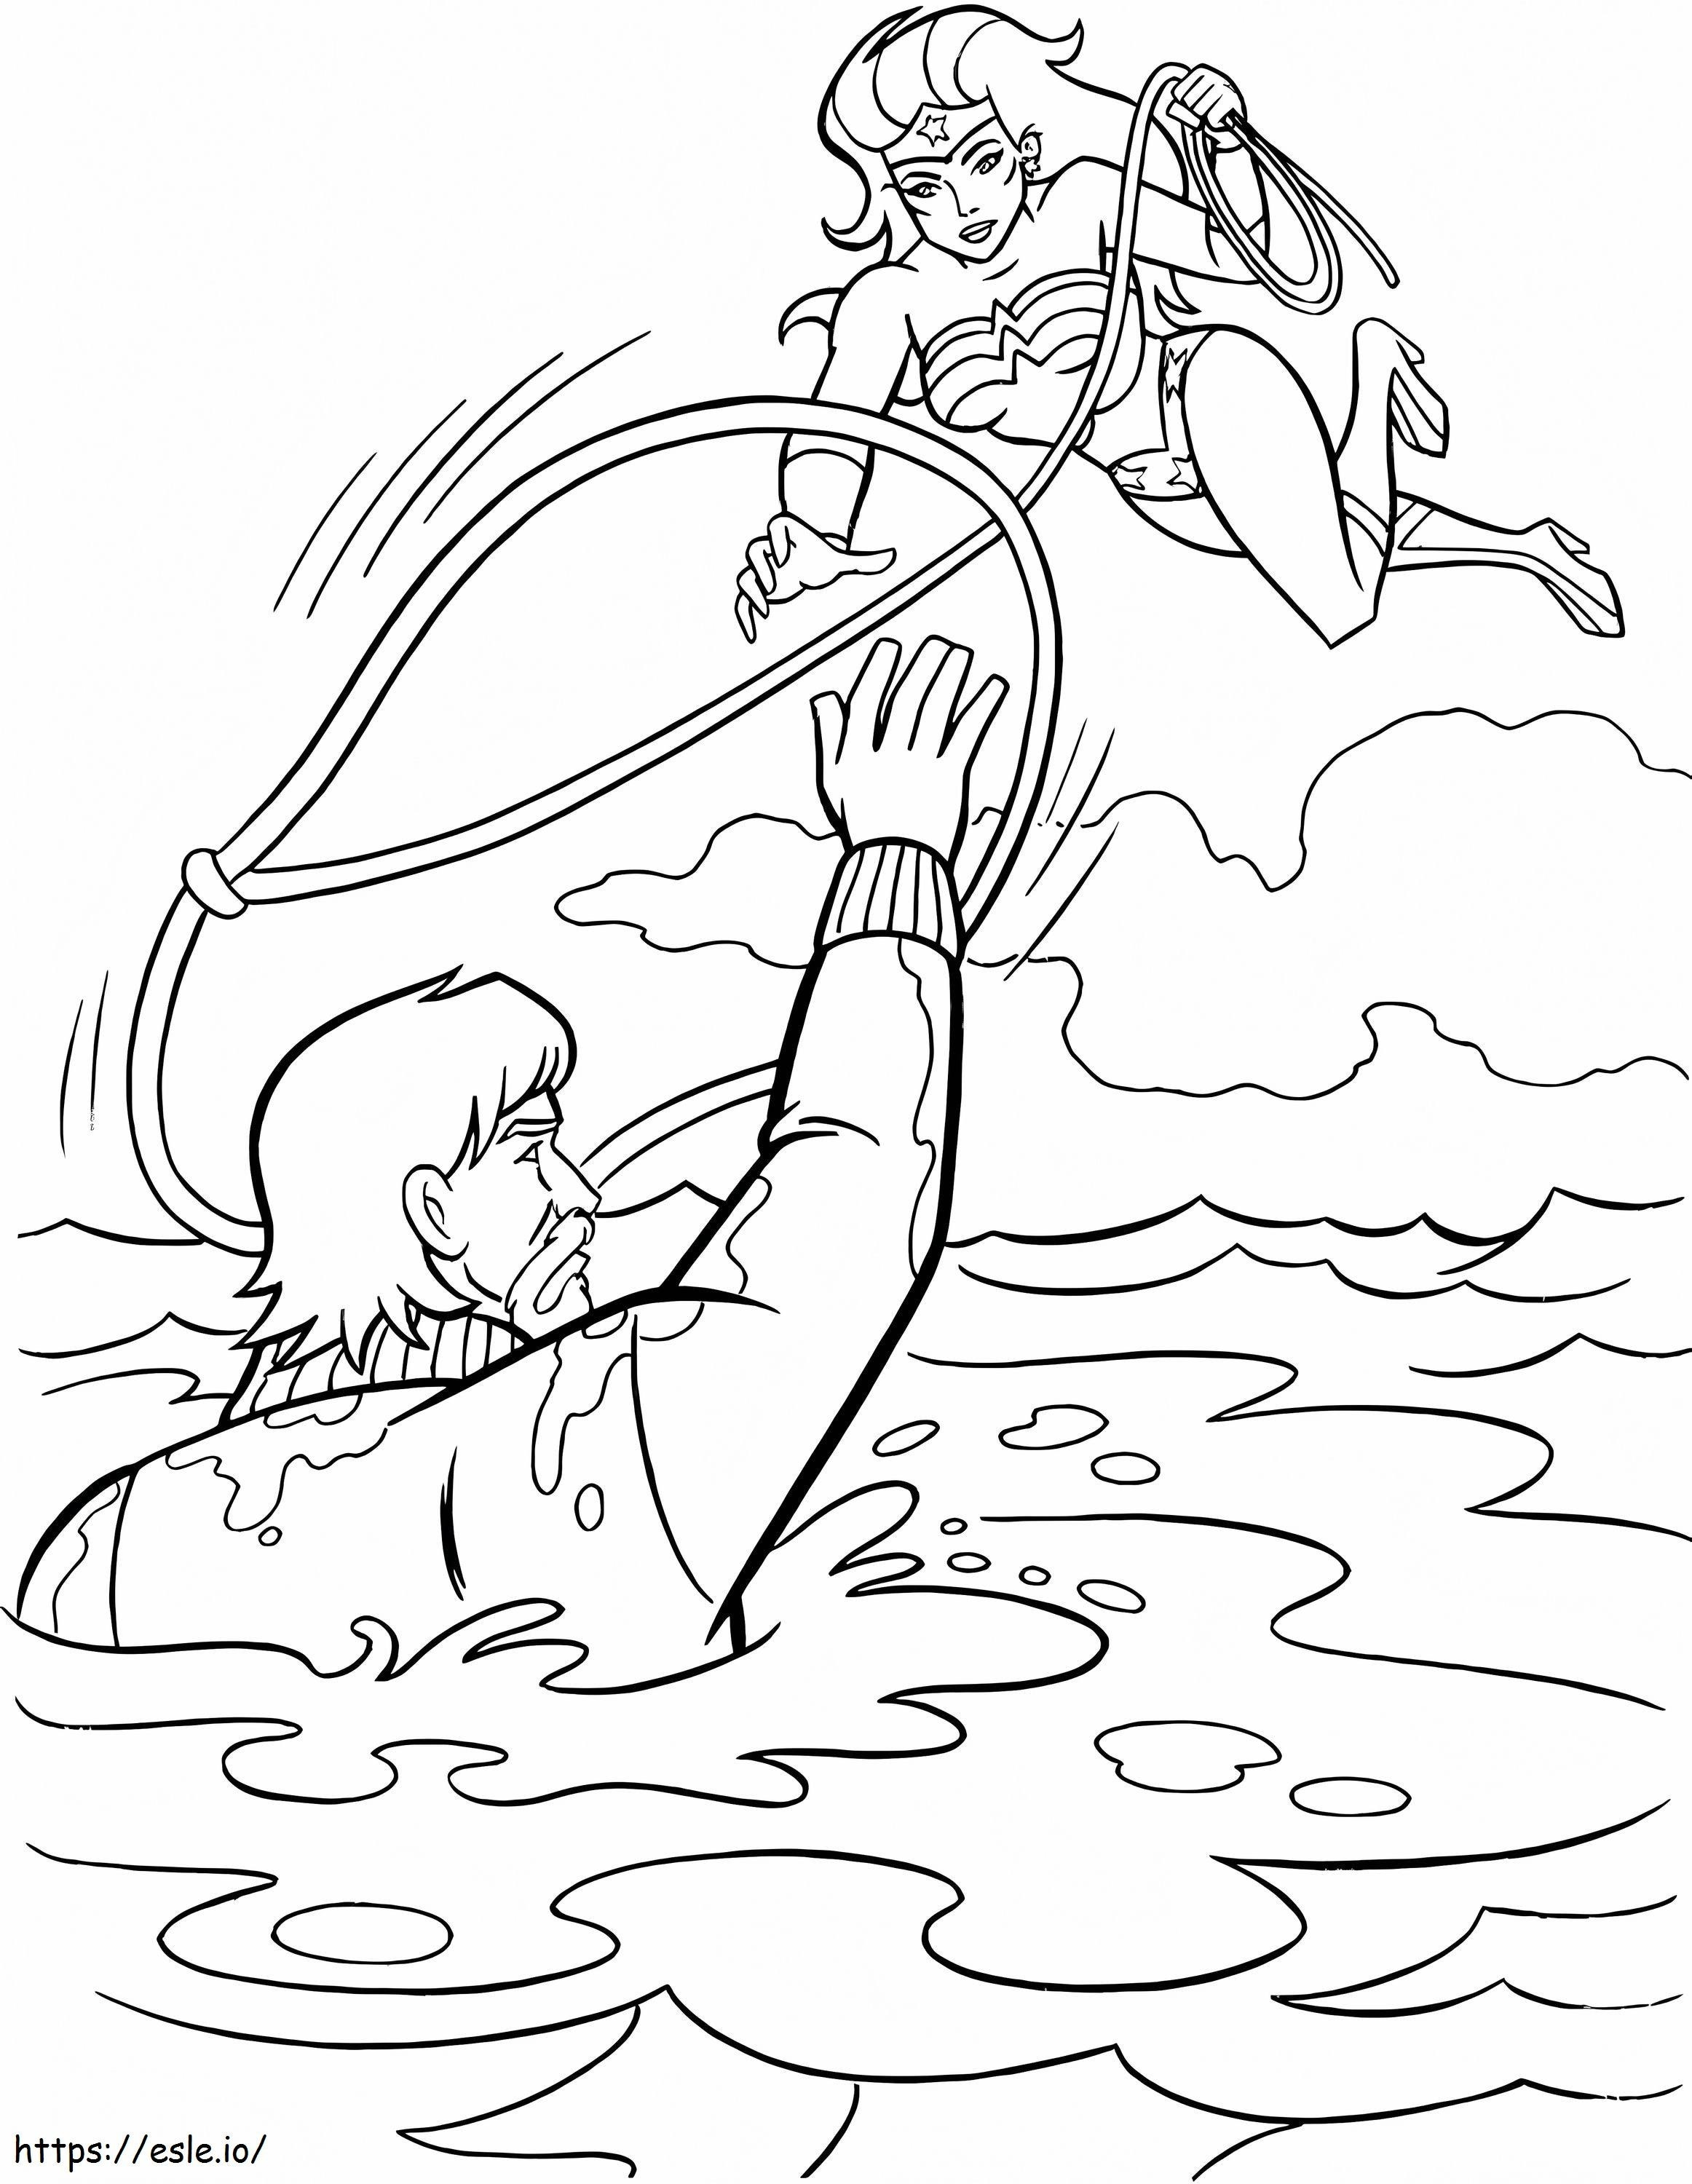 1568904274 Wonder Woman Helping A Man A4 coloring page